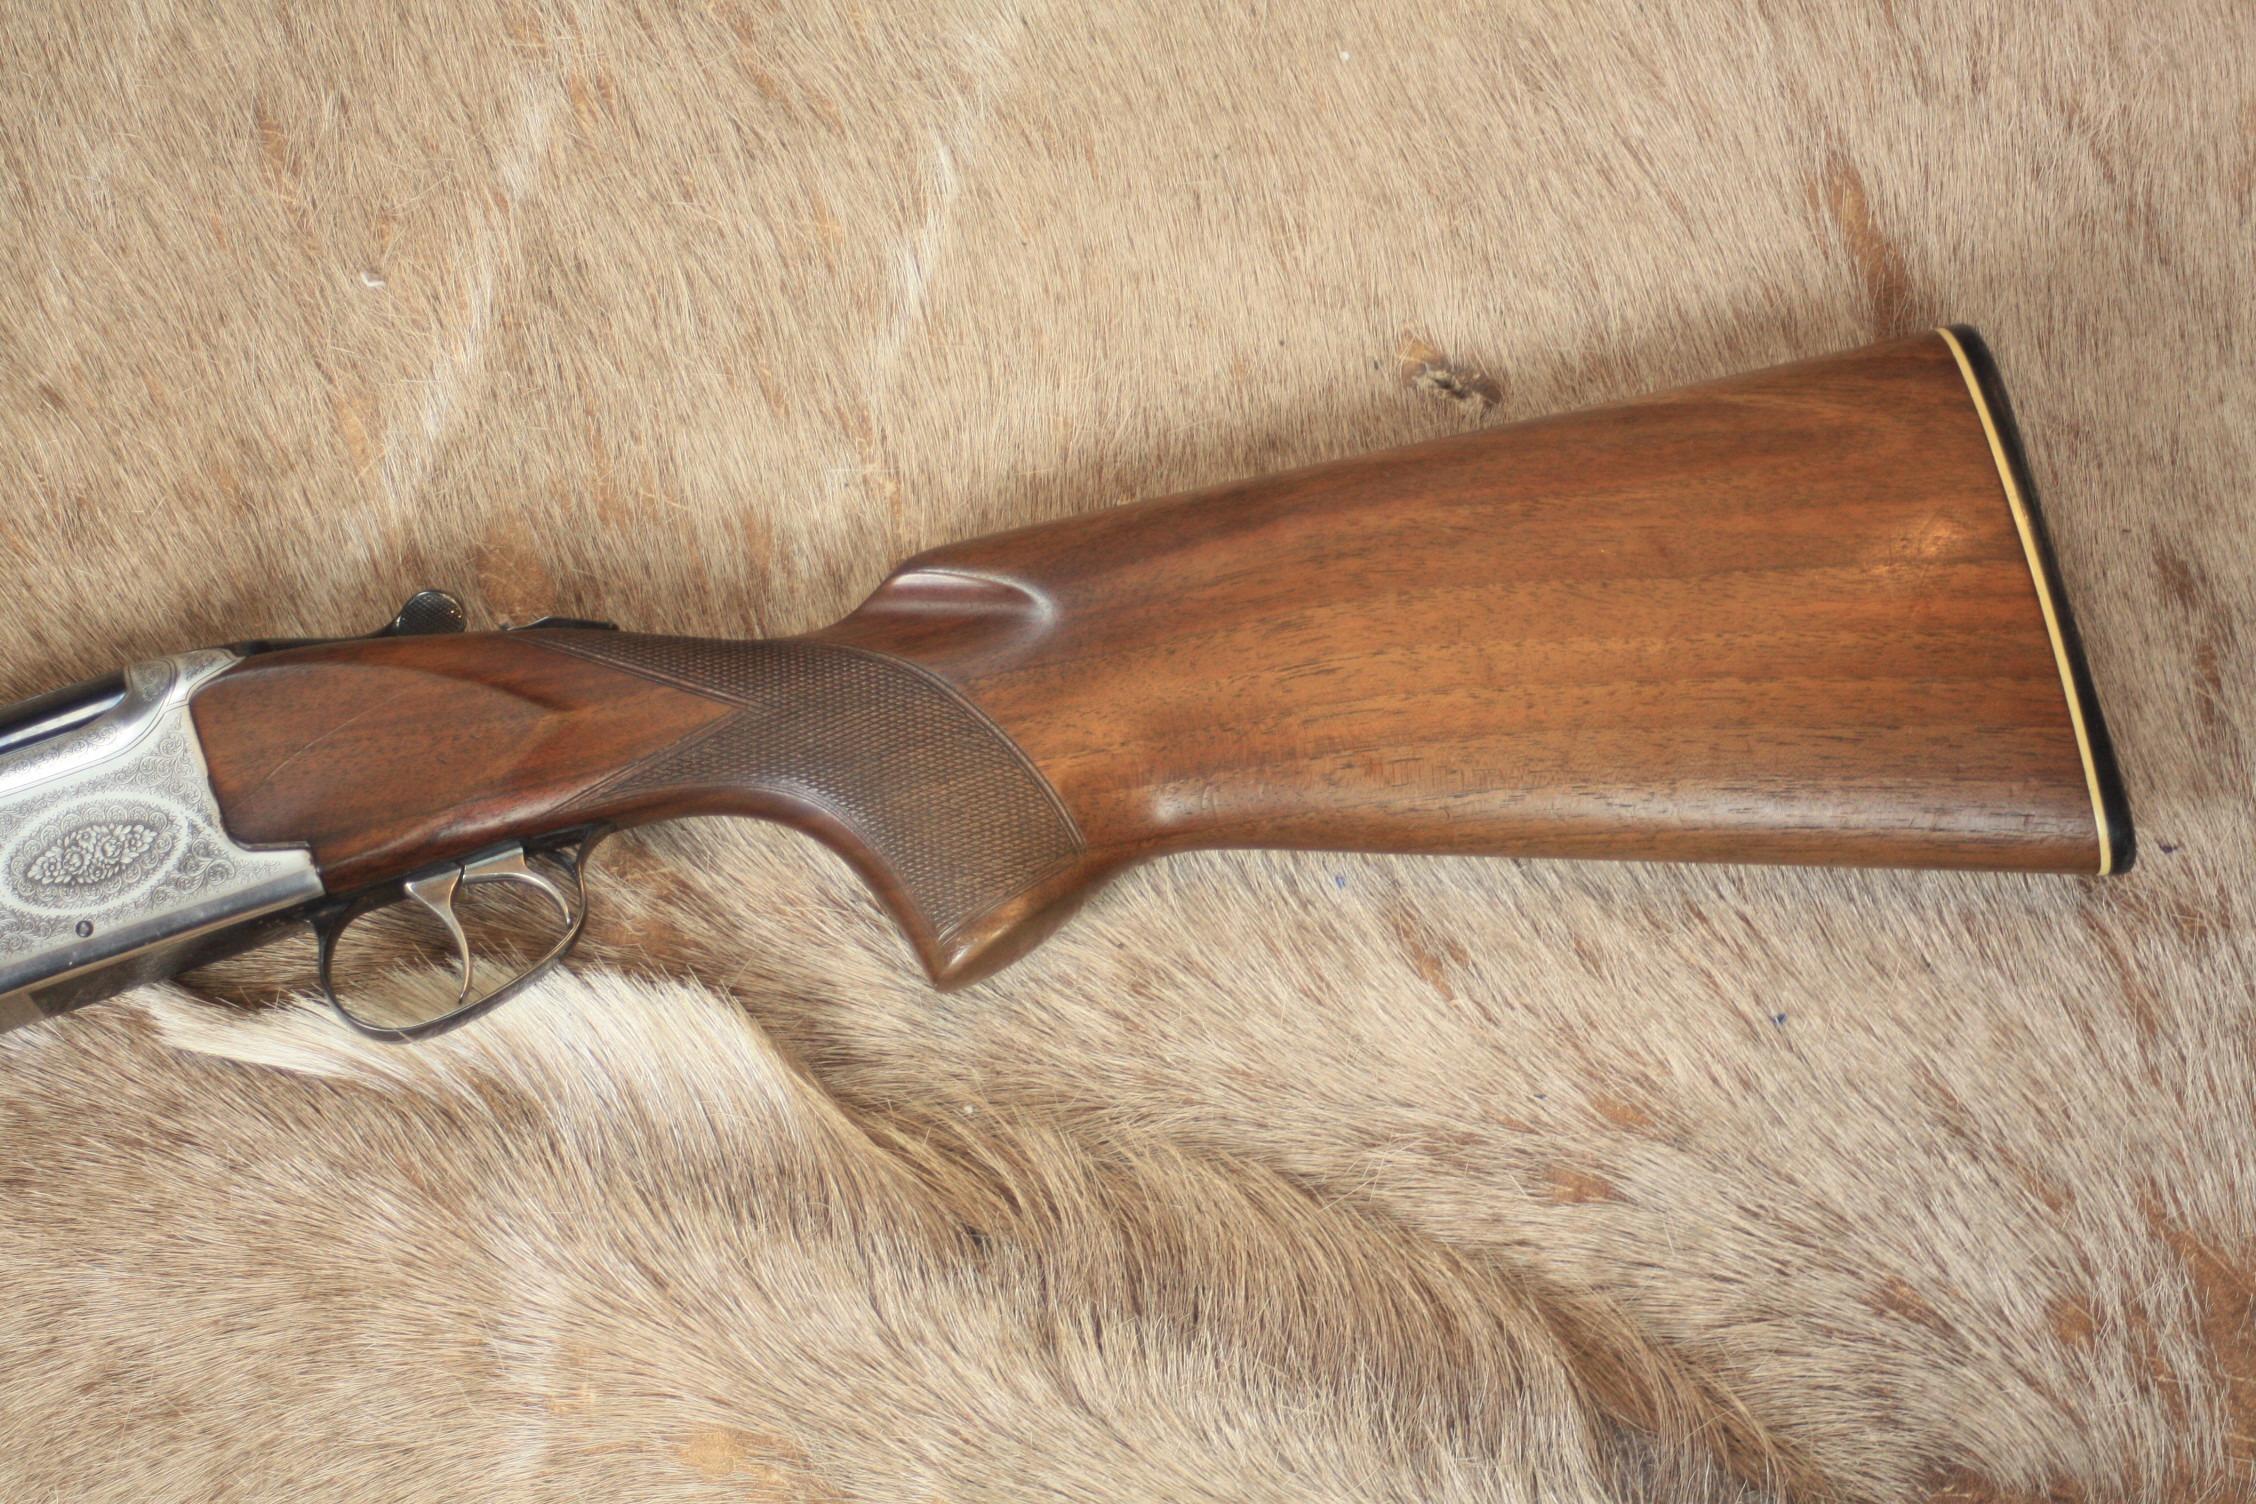 LAURONA 12-BORE OVER AND UNDER EJECTOR